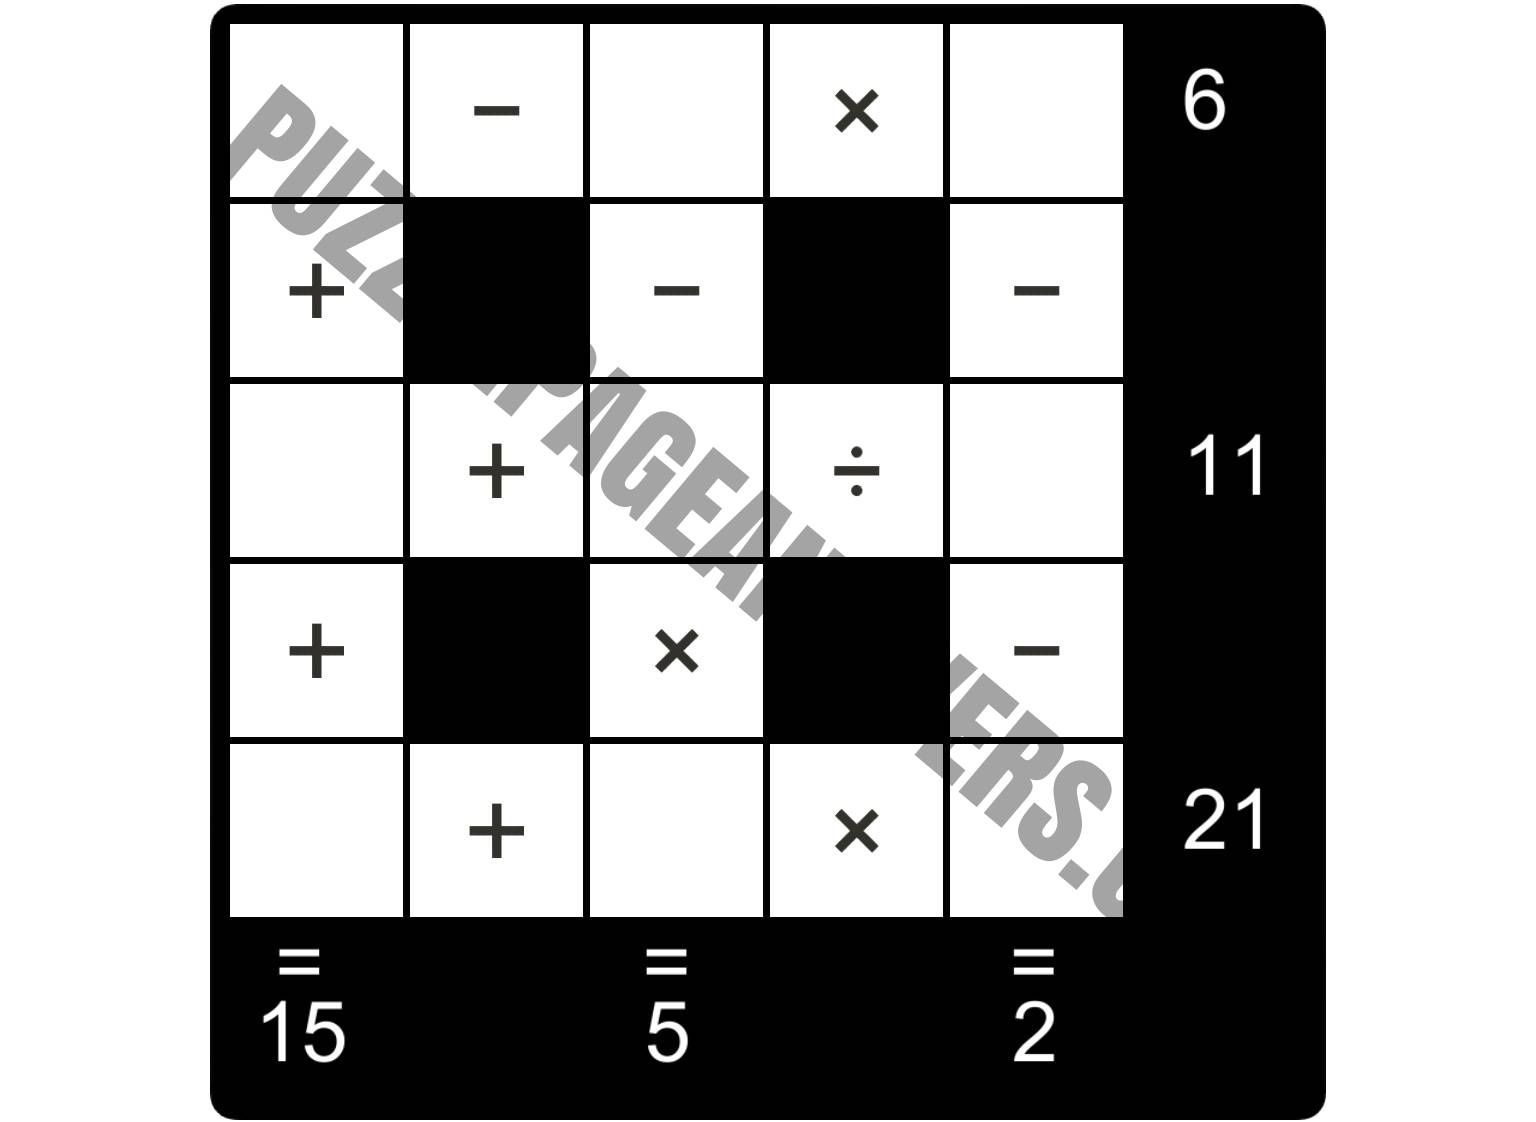 Puzzle Page Cross Sum March 29 2019 PuzzlePageAnswers com